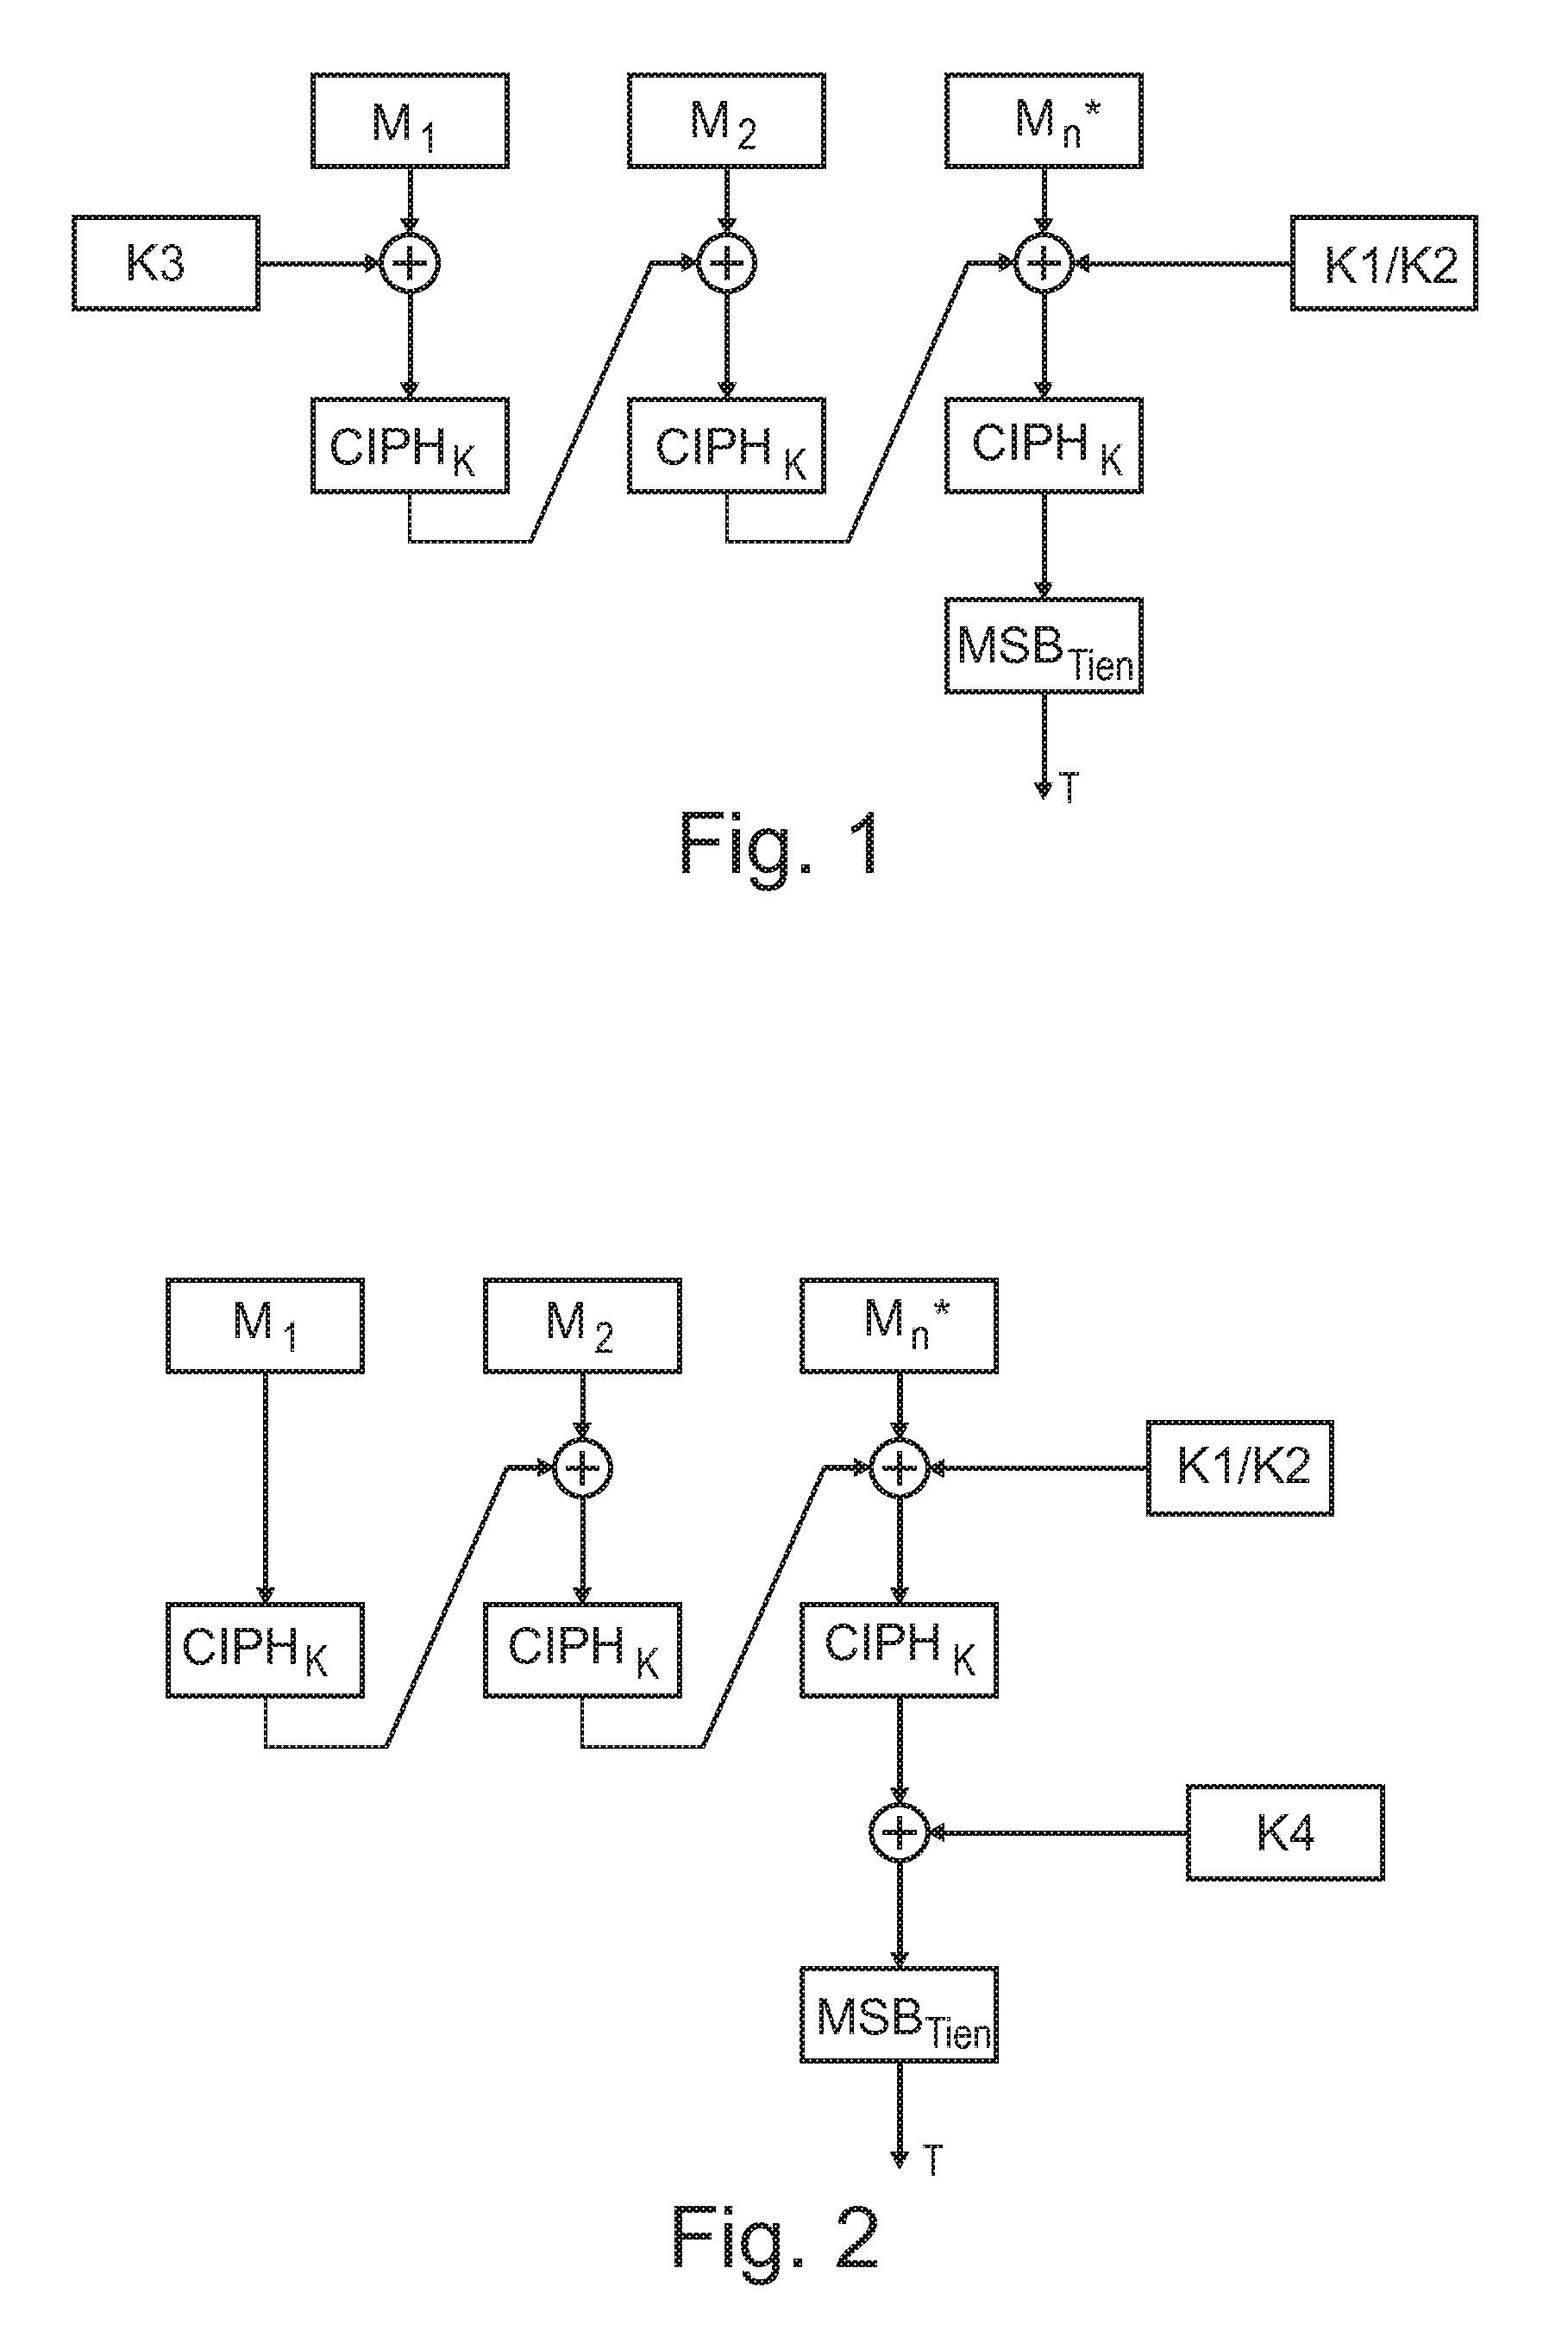 Device for generating a message authentication code for authenticating a message